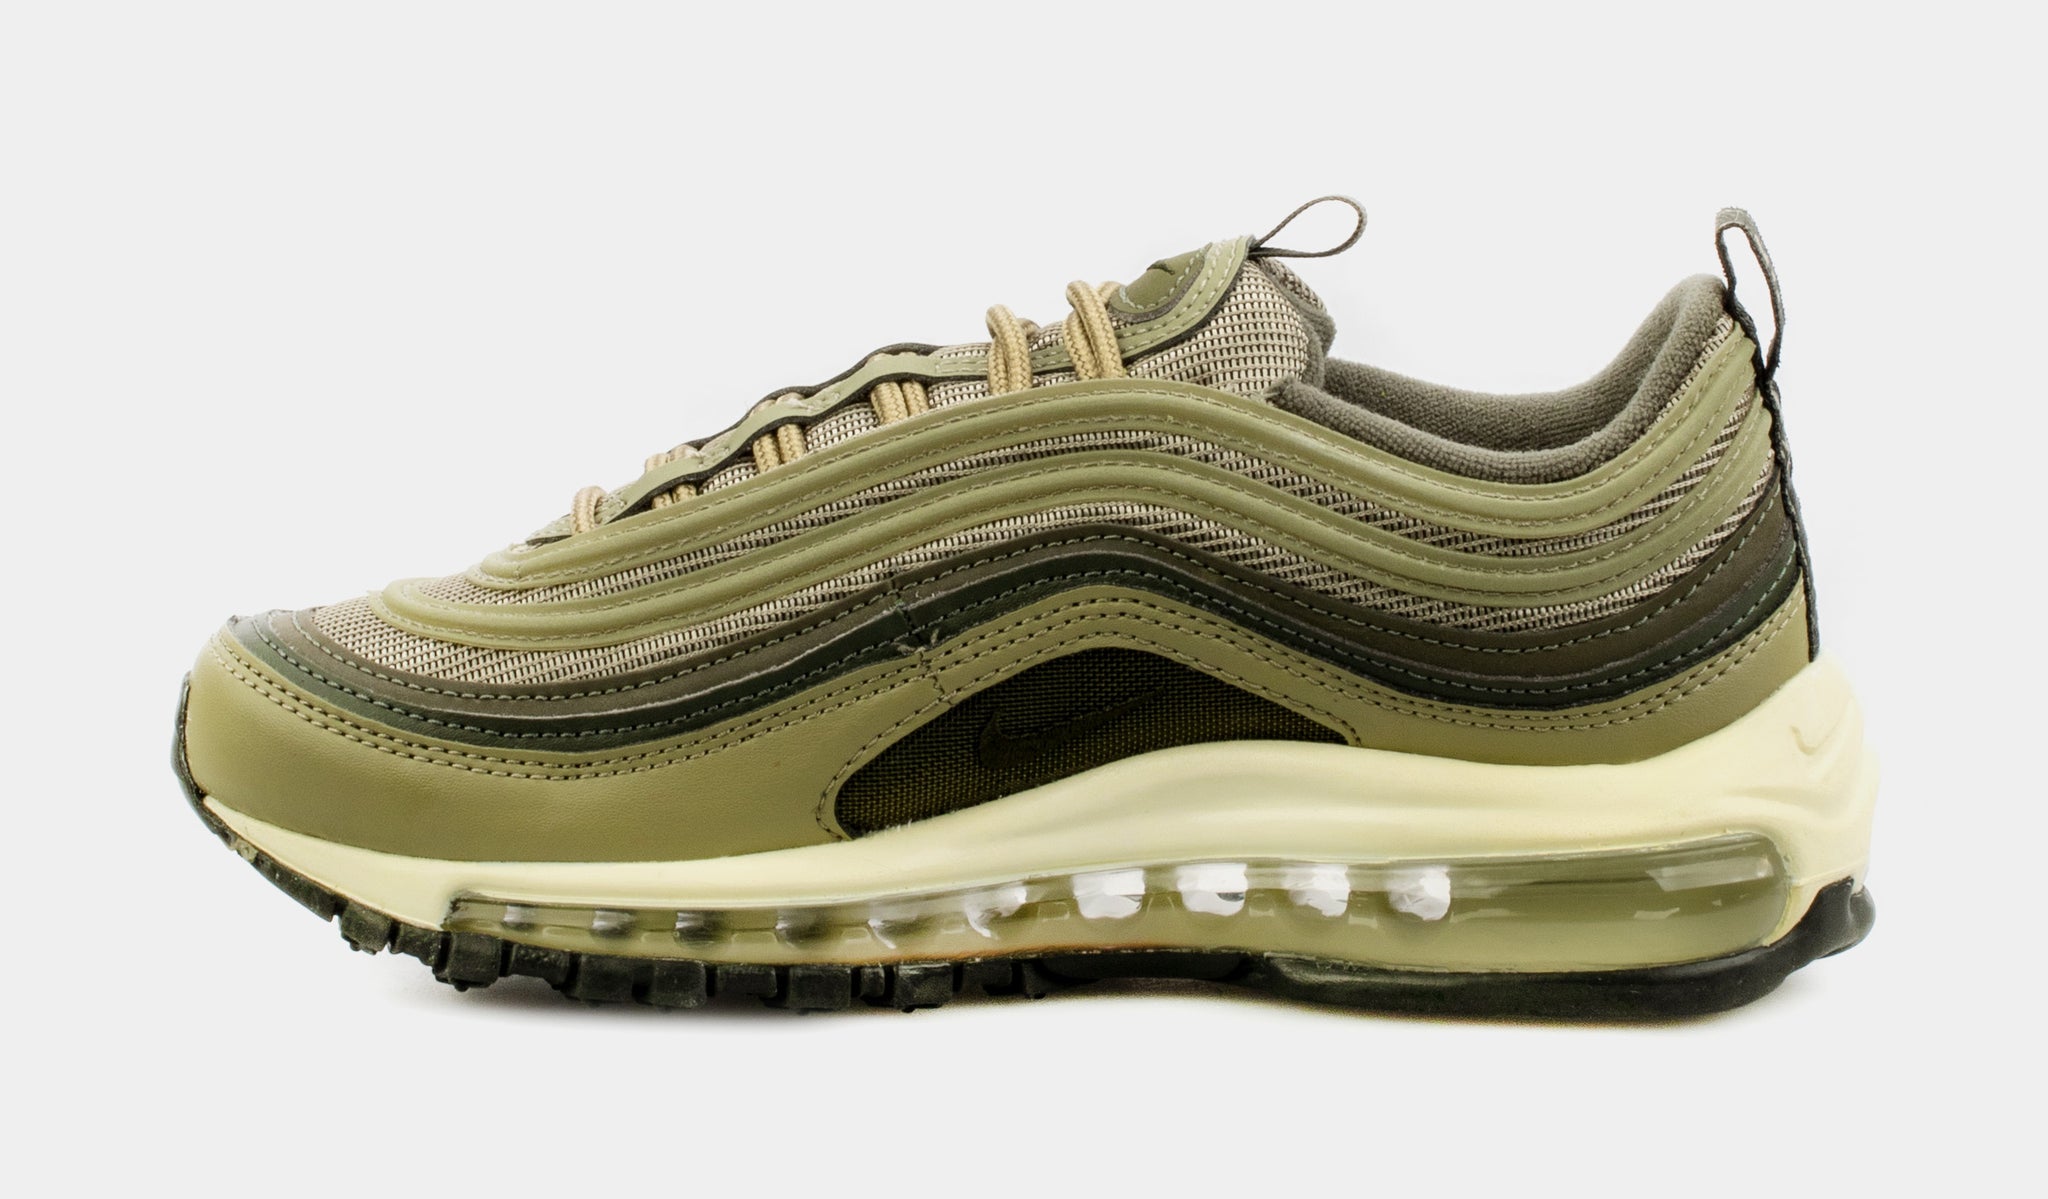 Nike Women's Air Max 97 Neutral Olive Shoes